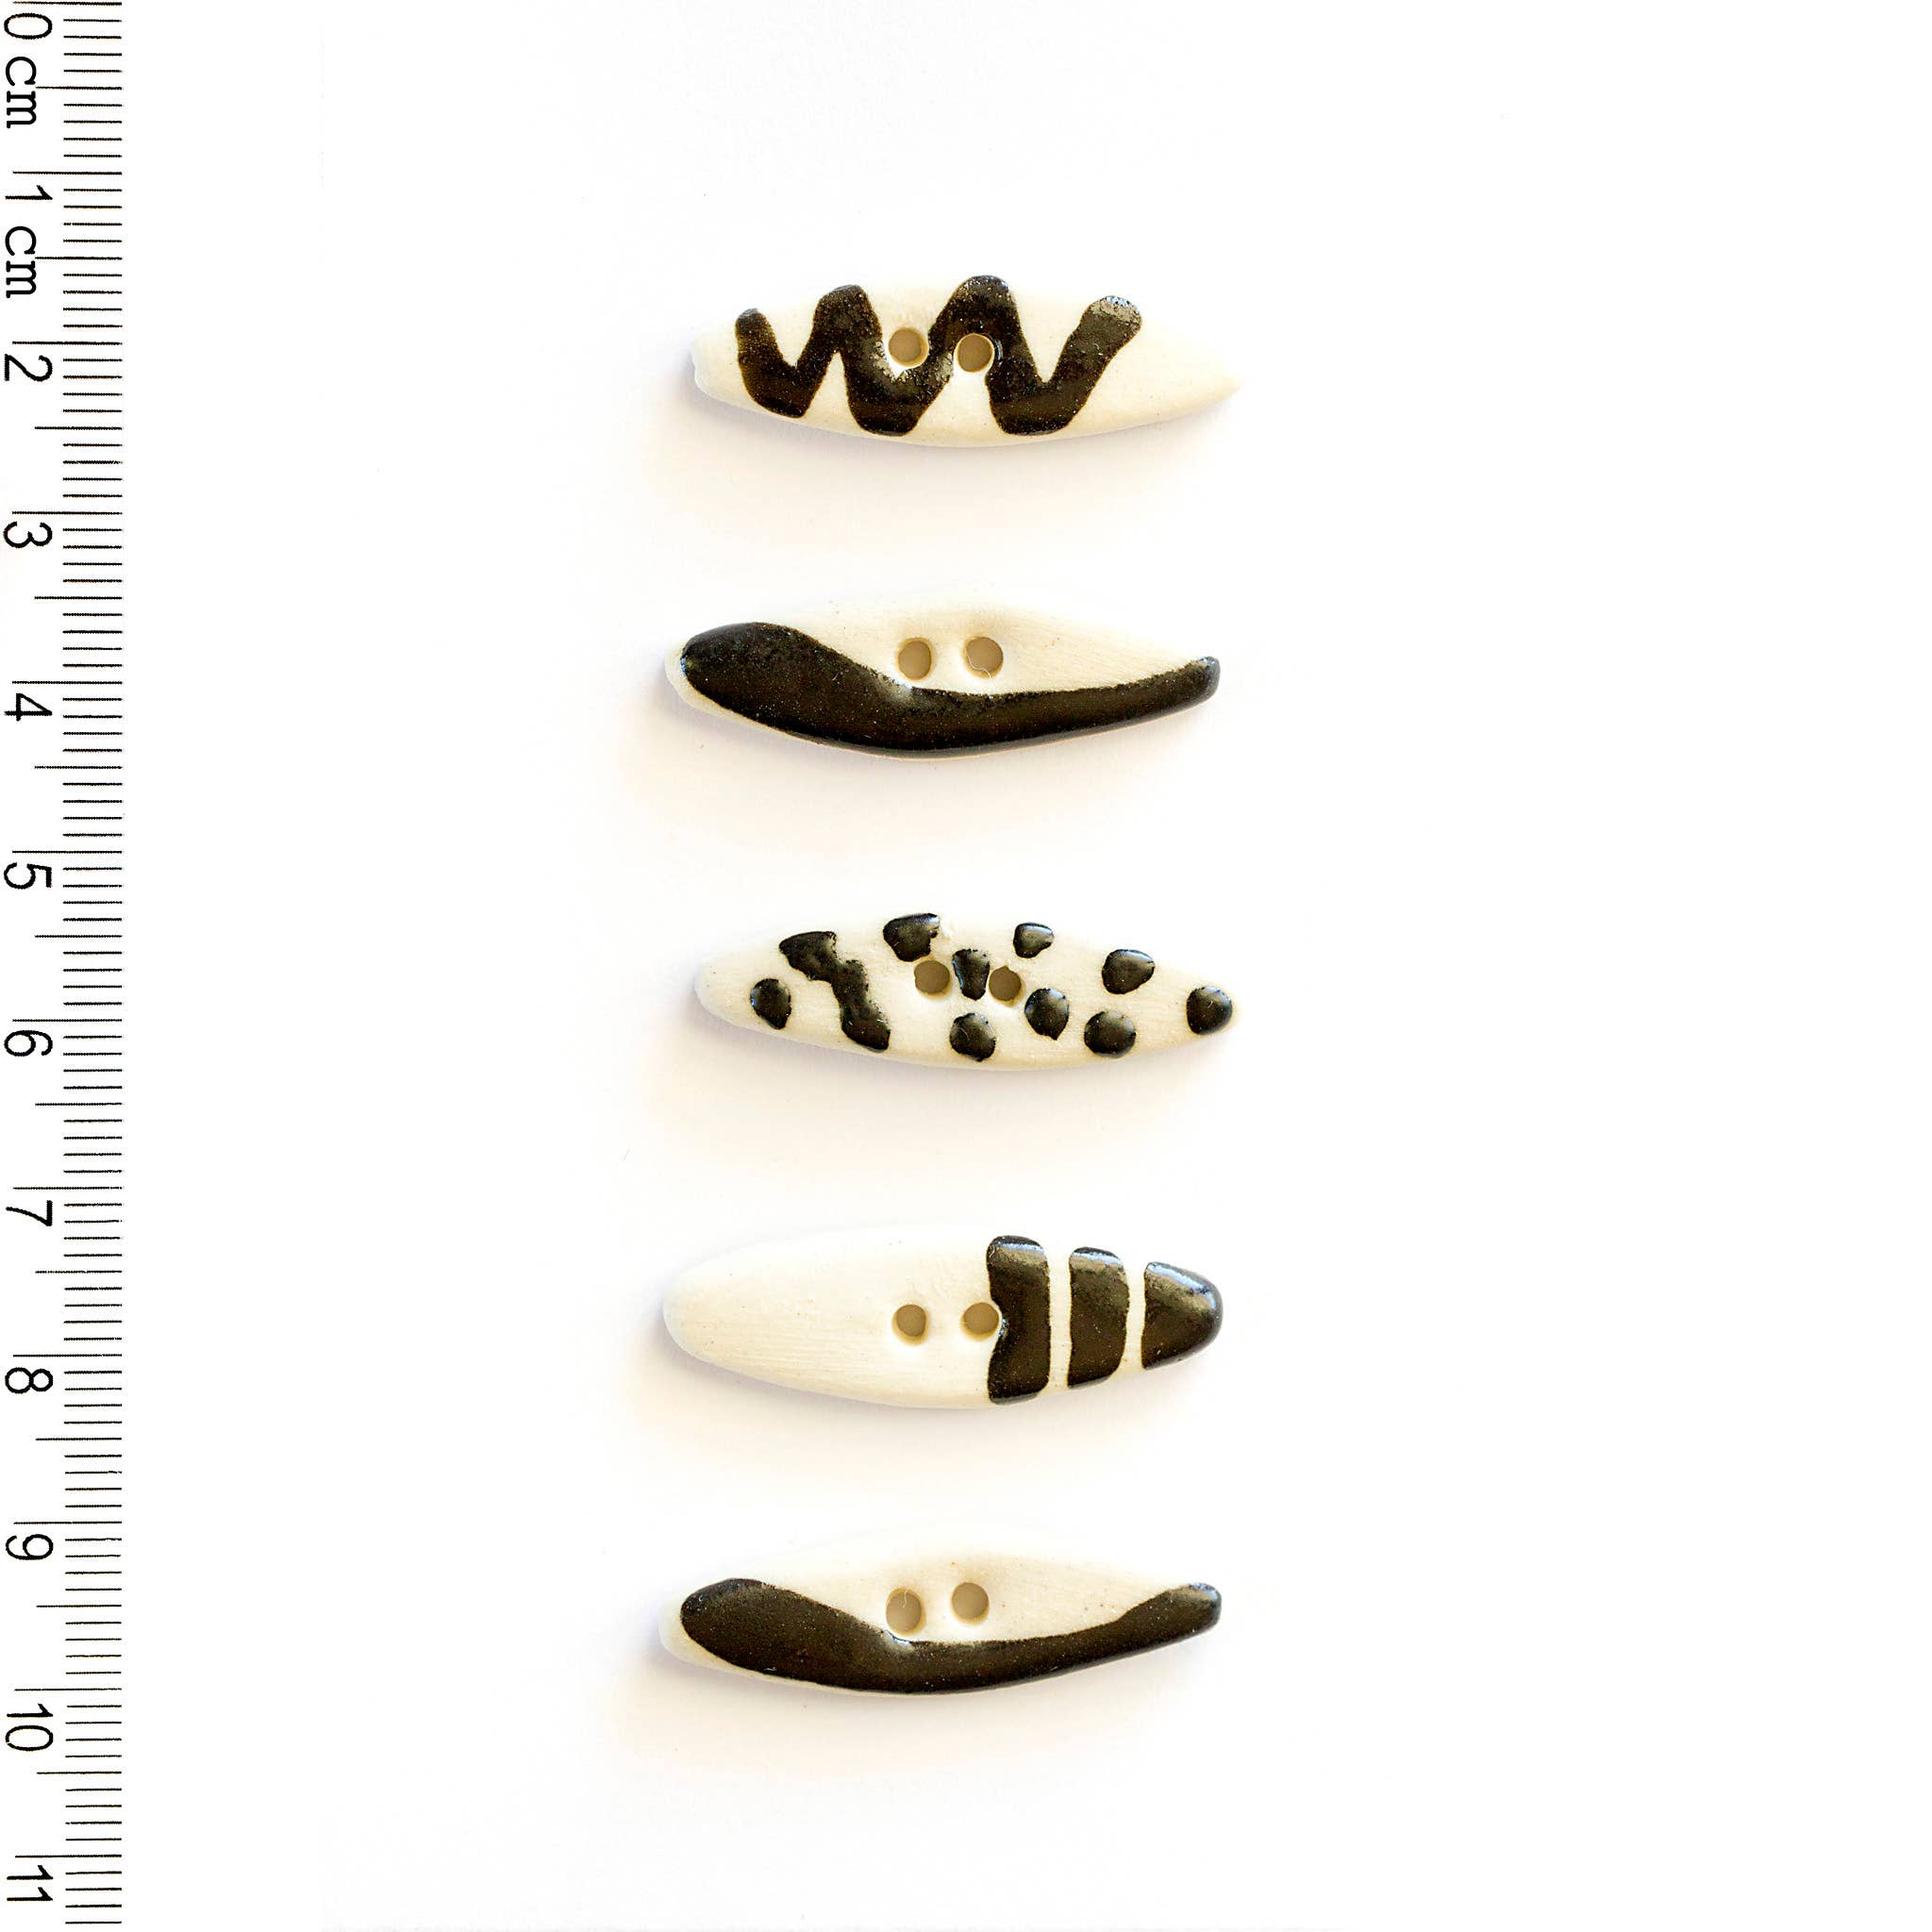 Incomparable Buttons - 5 Oval Geometric Pattern Buttons